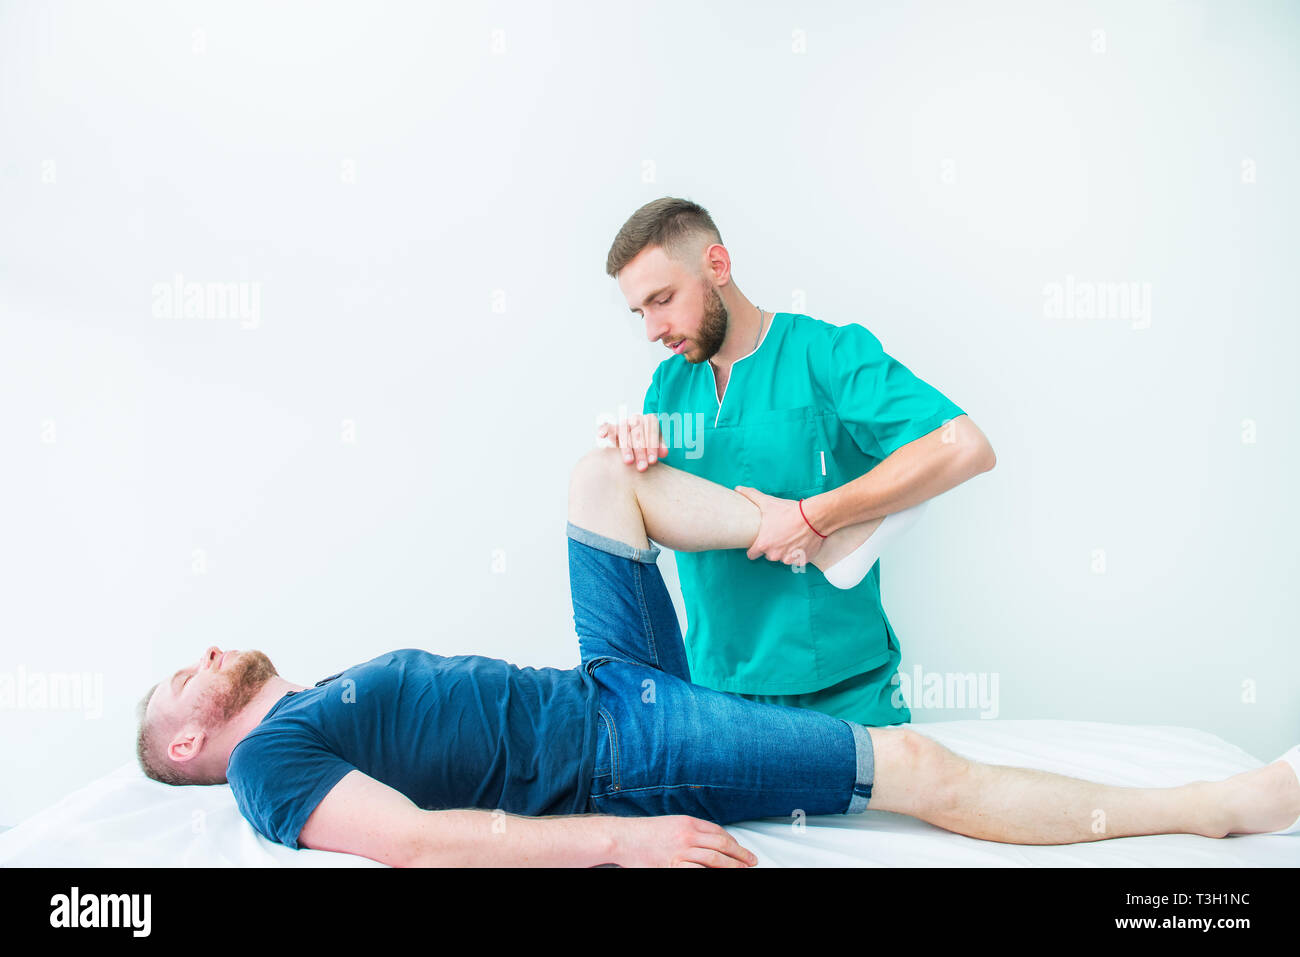 Young male receiving massage from therapist. A chiropractor stretching his patient's legs in medical office. Neurological physical examination. Osteop Stock Photo